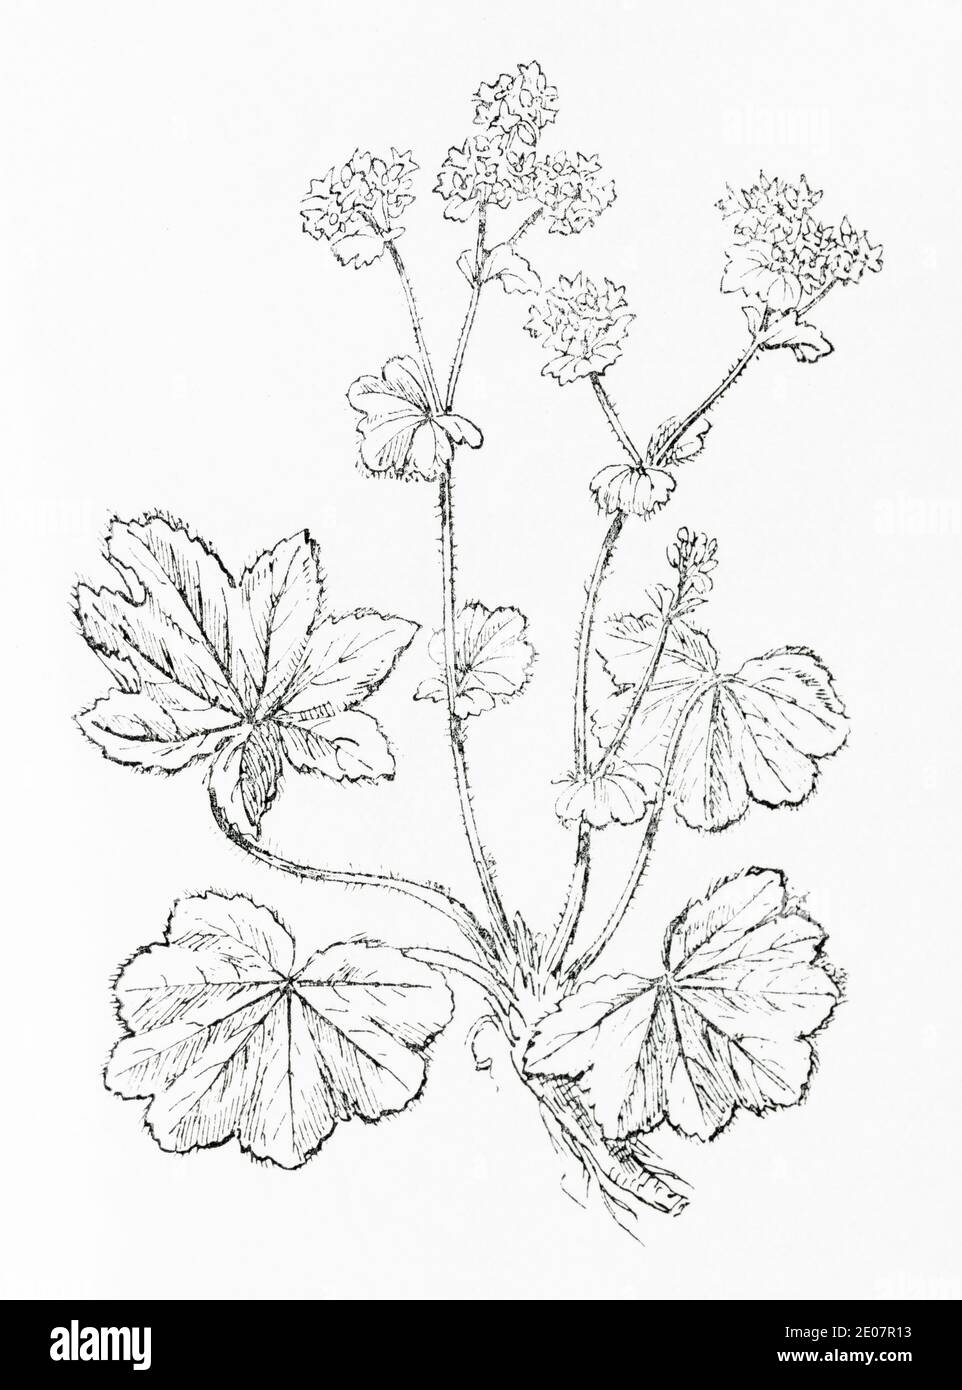 Old botanical illustration engraving of Lady's Mantle / Alchemilla xanthochlora, Alchemilla vulgaris. Traditional medicinal herbal plant. See Notes Stock Photo